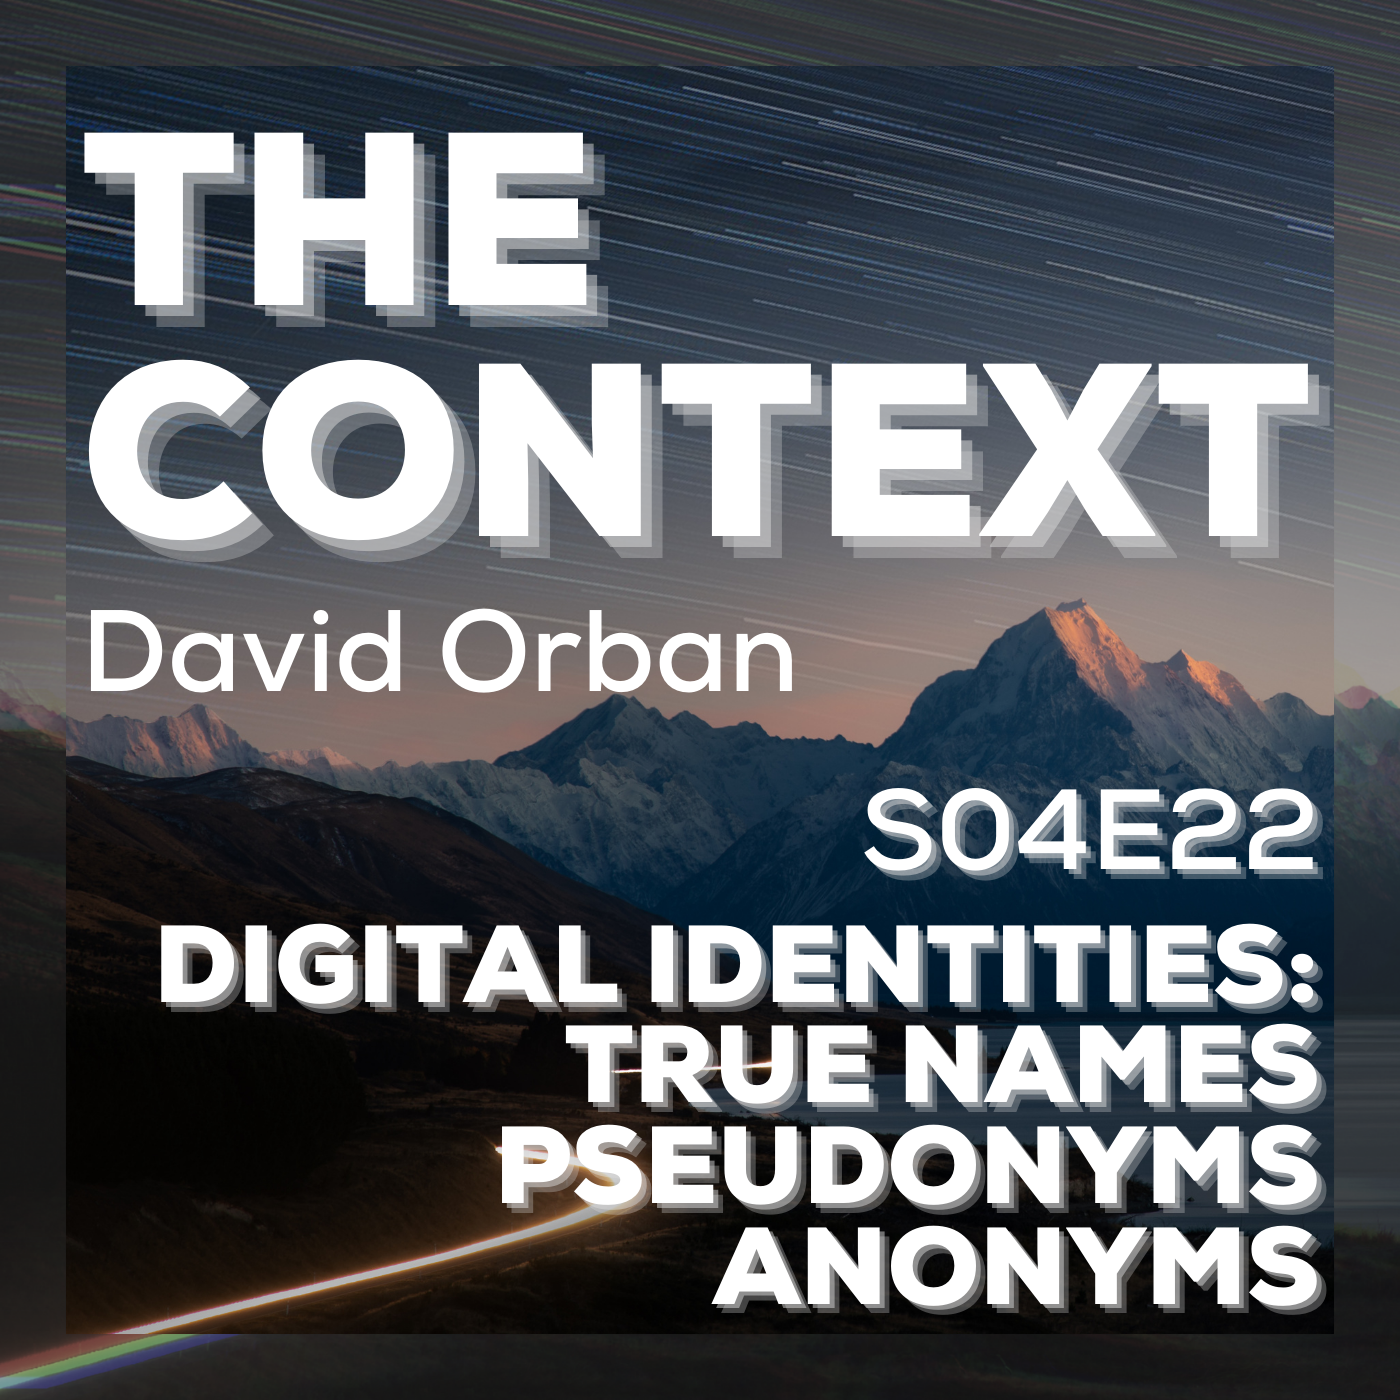 Digital Identities: True names, Pseudonyms, Anonyms - The Context S04E22